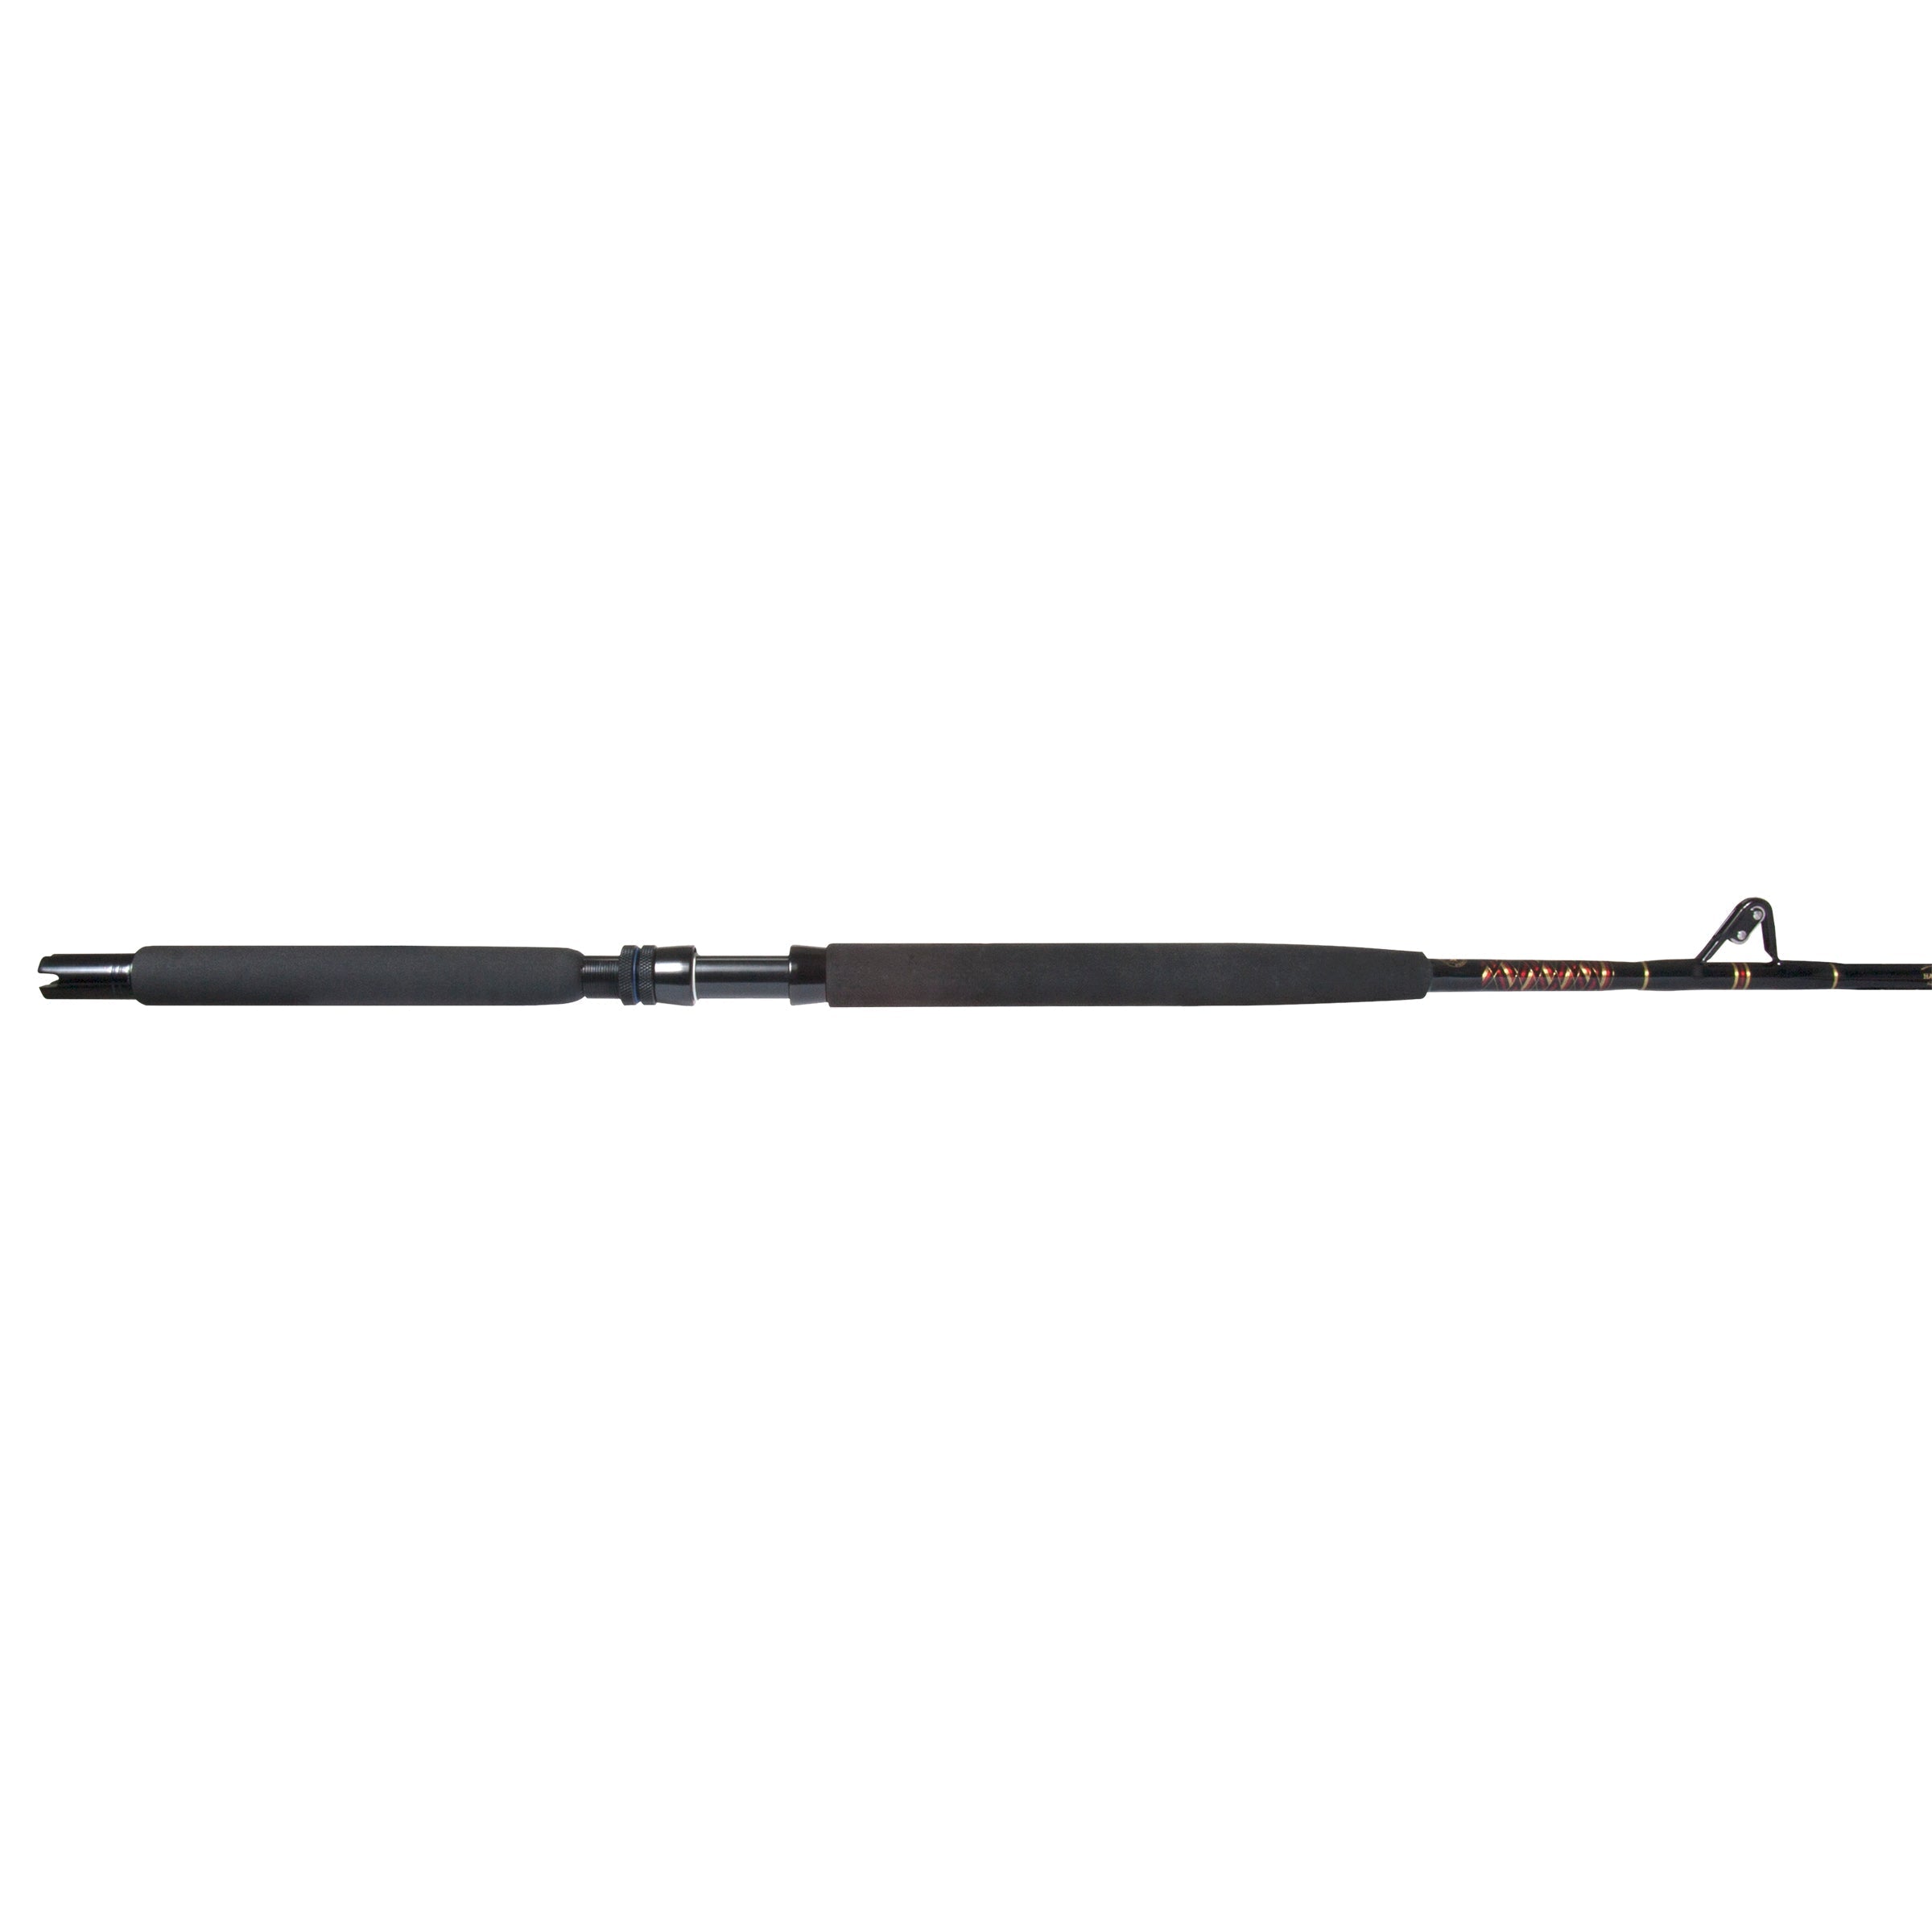 Star Rods B50100hca Handcrafted Stand Up Conventional Rod 6' 50-100lb AFTCO Roller Stripper, Size: One Size